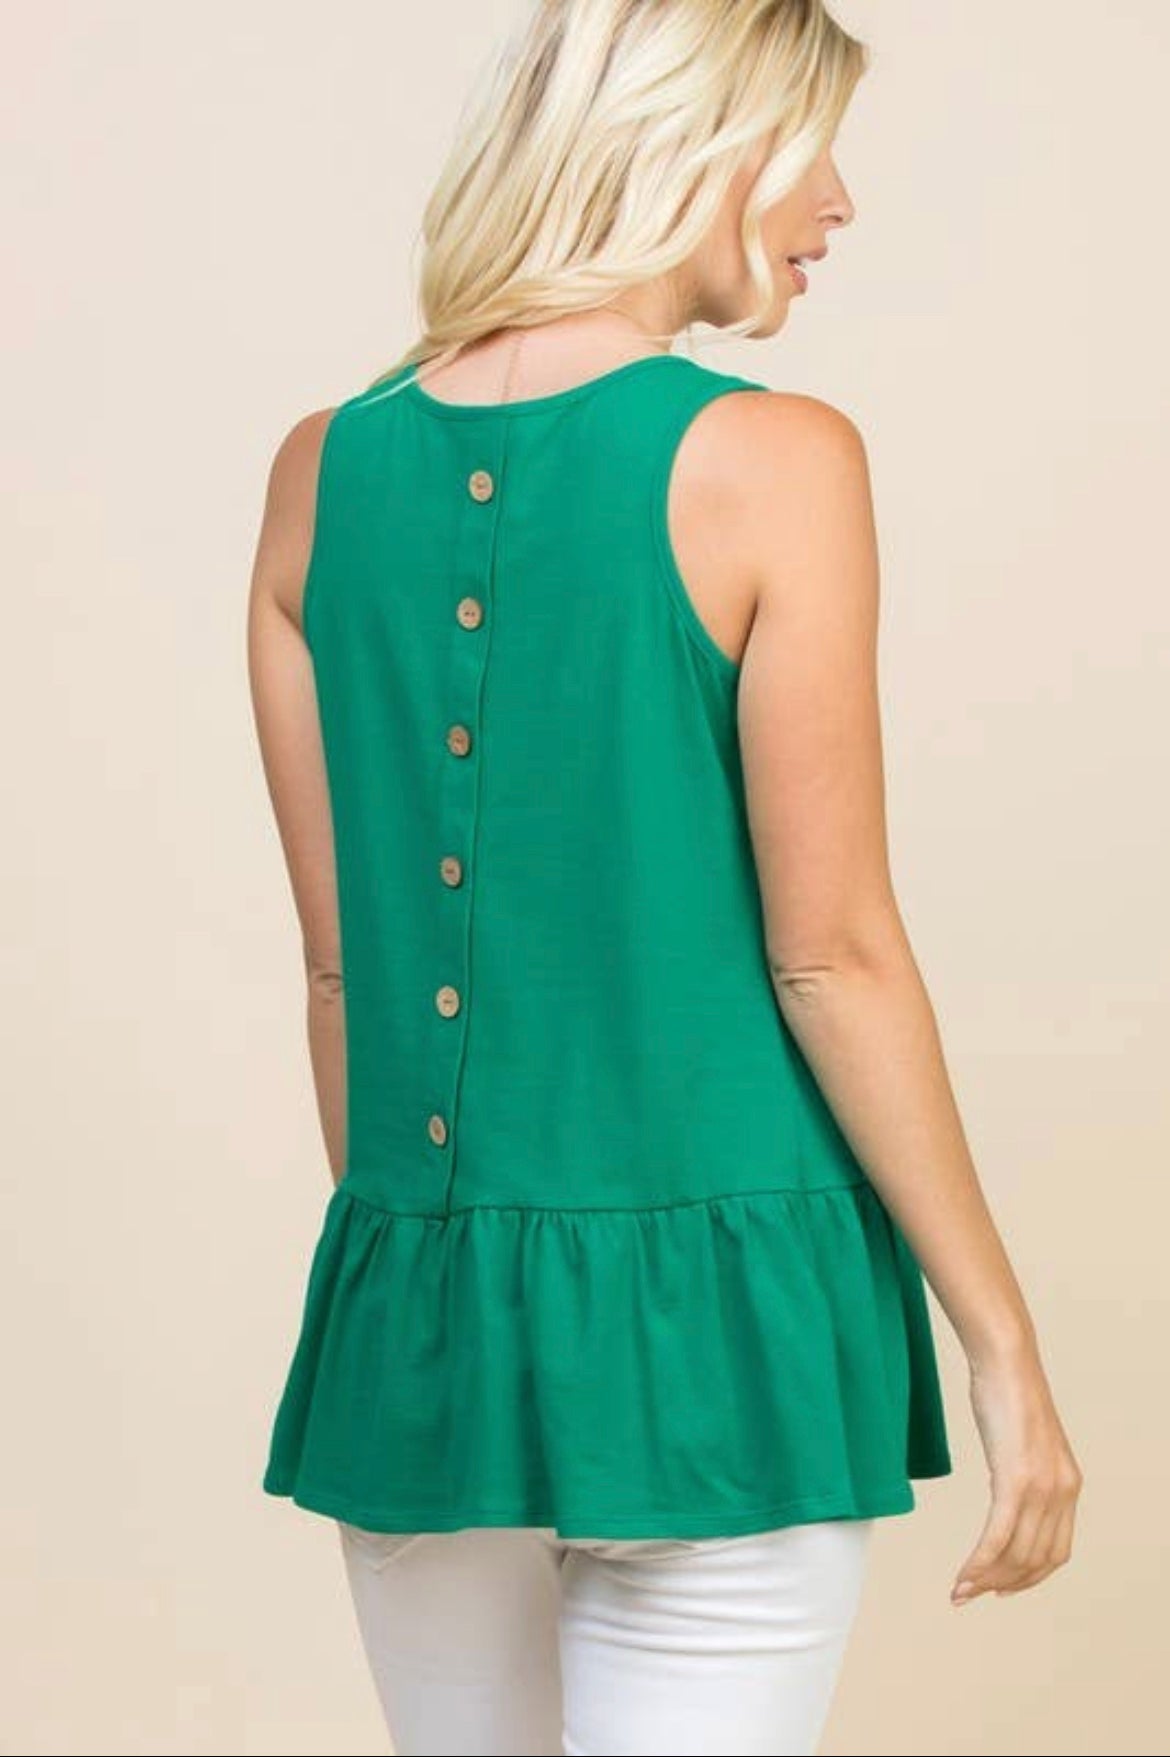 Come Back Again Kelly Green Ruffle Top - Anchor Fusion Boutique